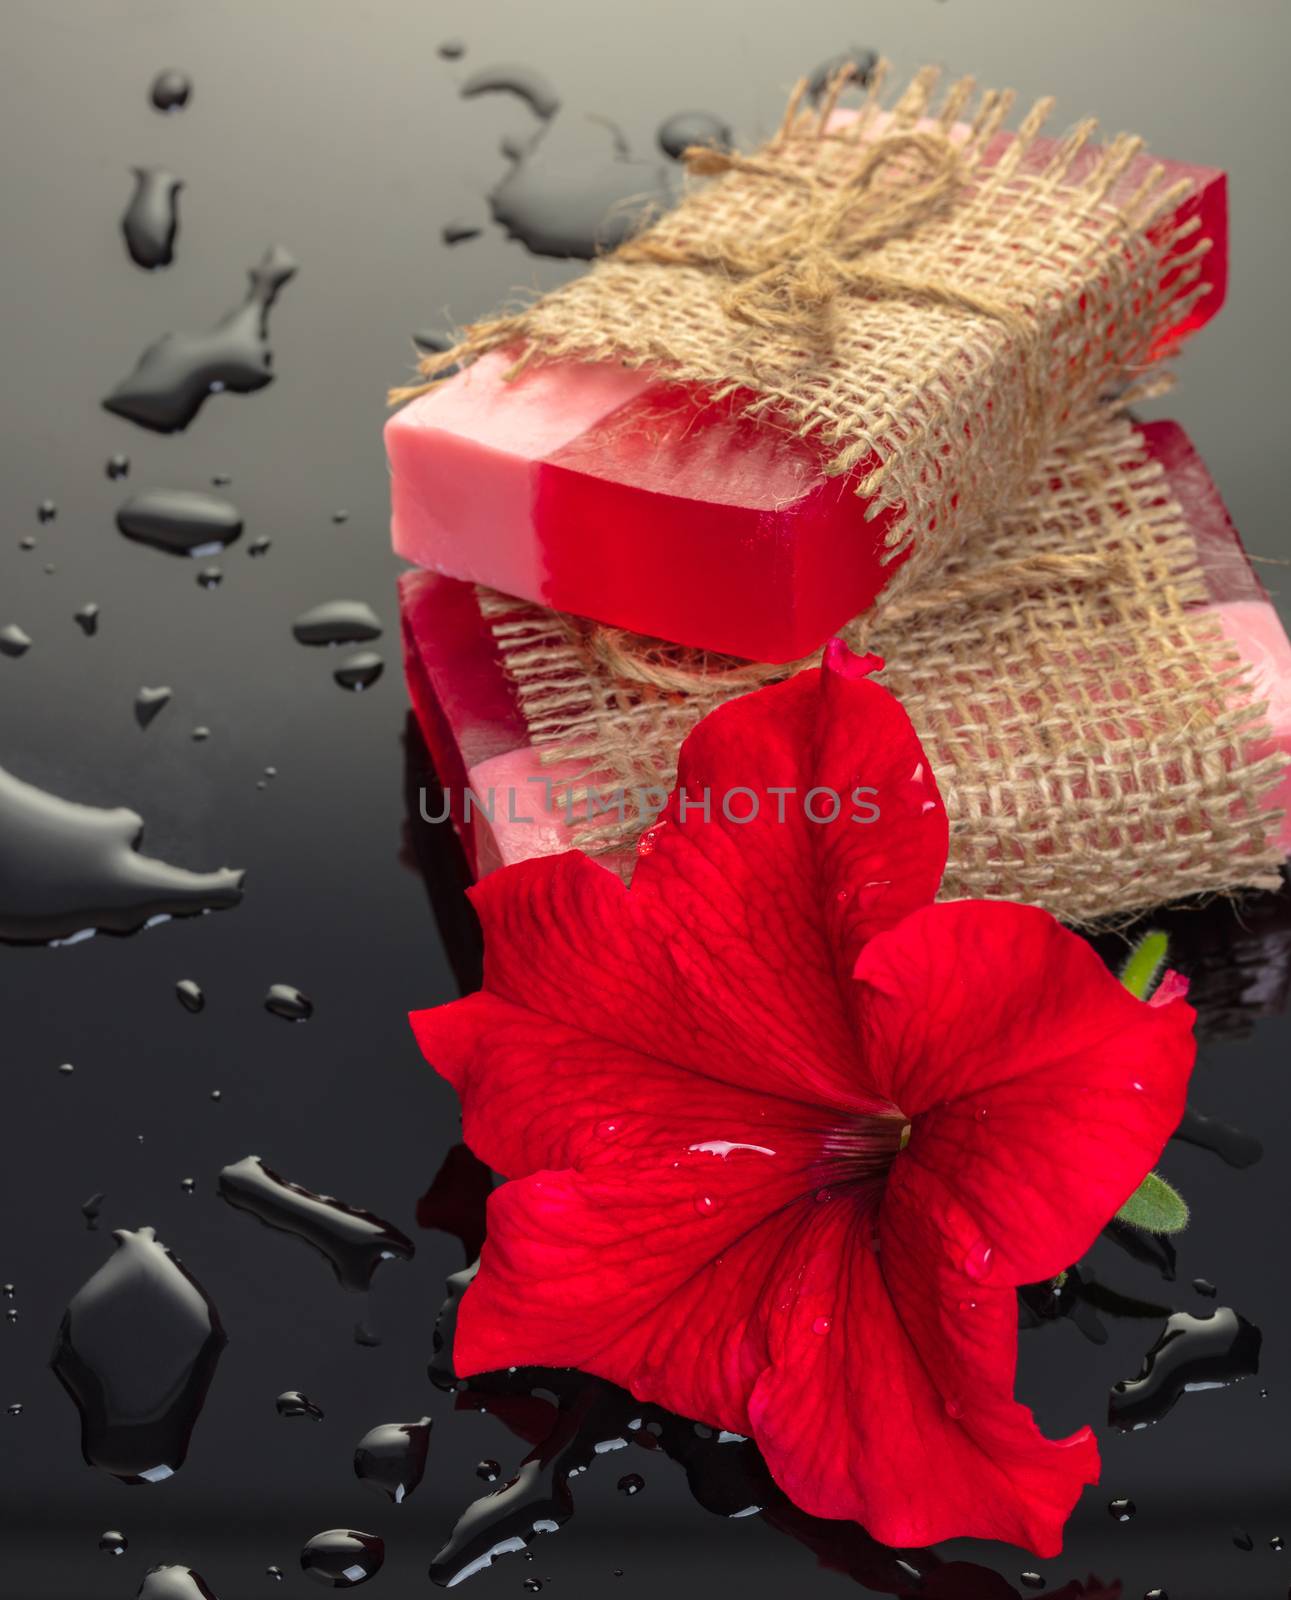 Handmade soap red with a flower on black background